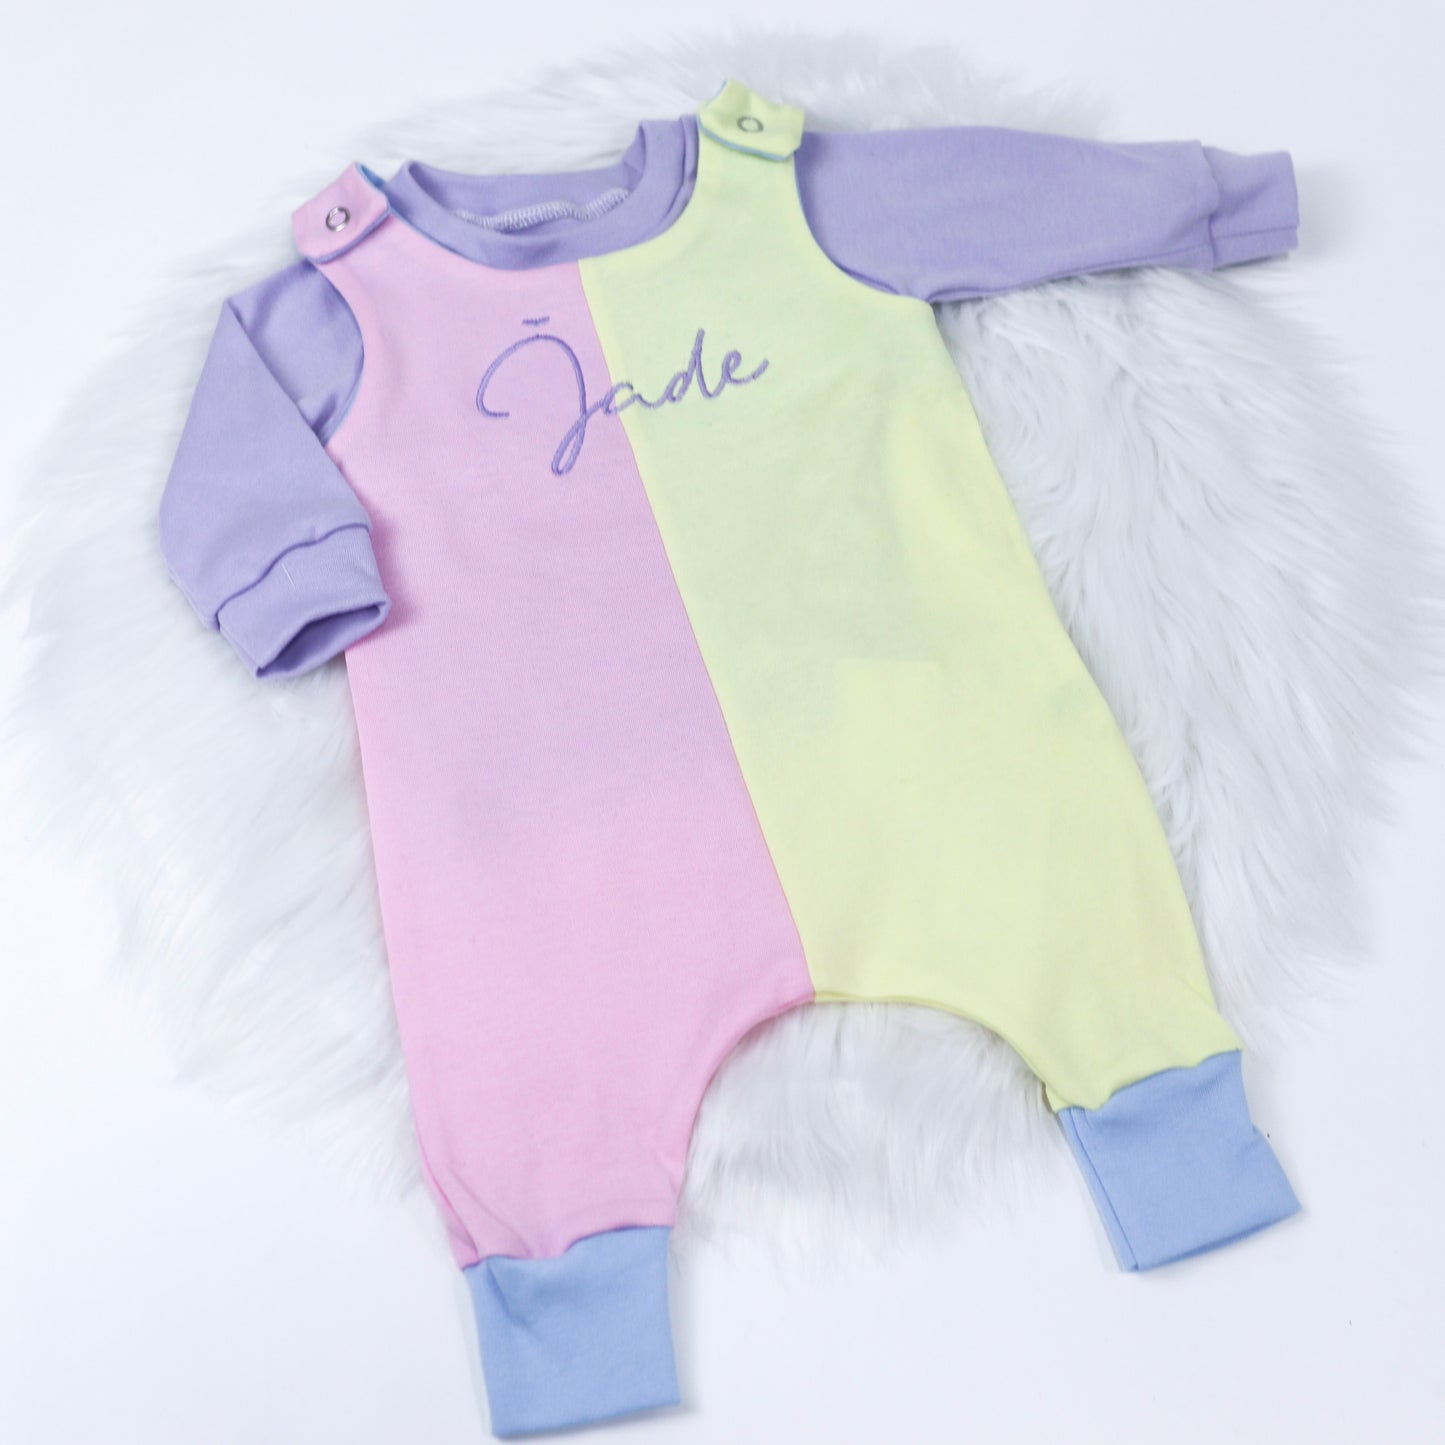 Lemon, Baby Pink & Baby Blue Lounge Romper (Made to order)